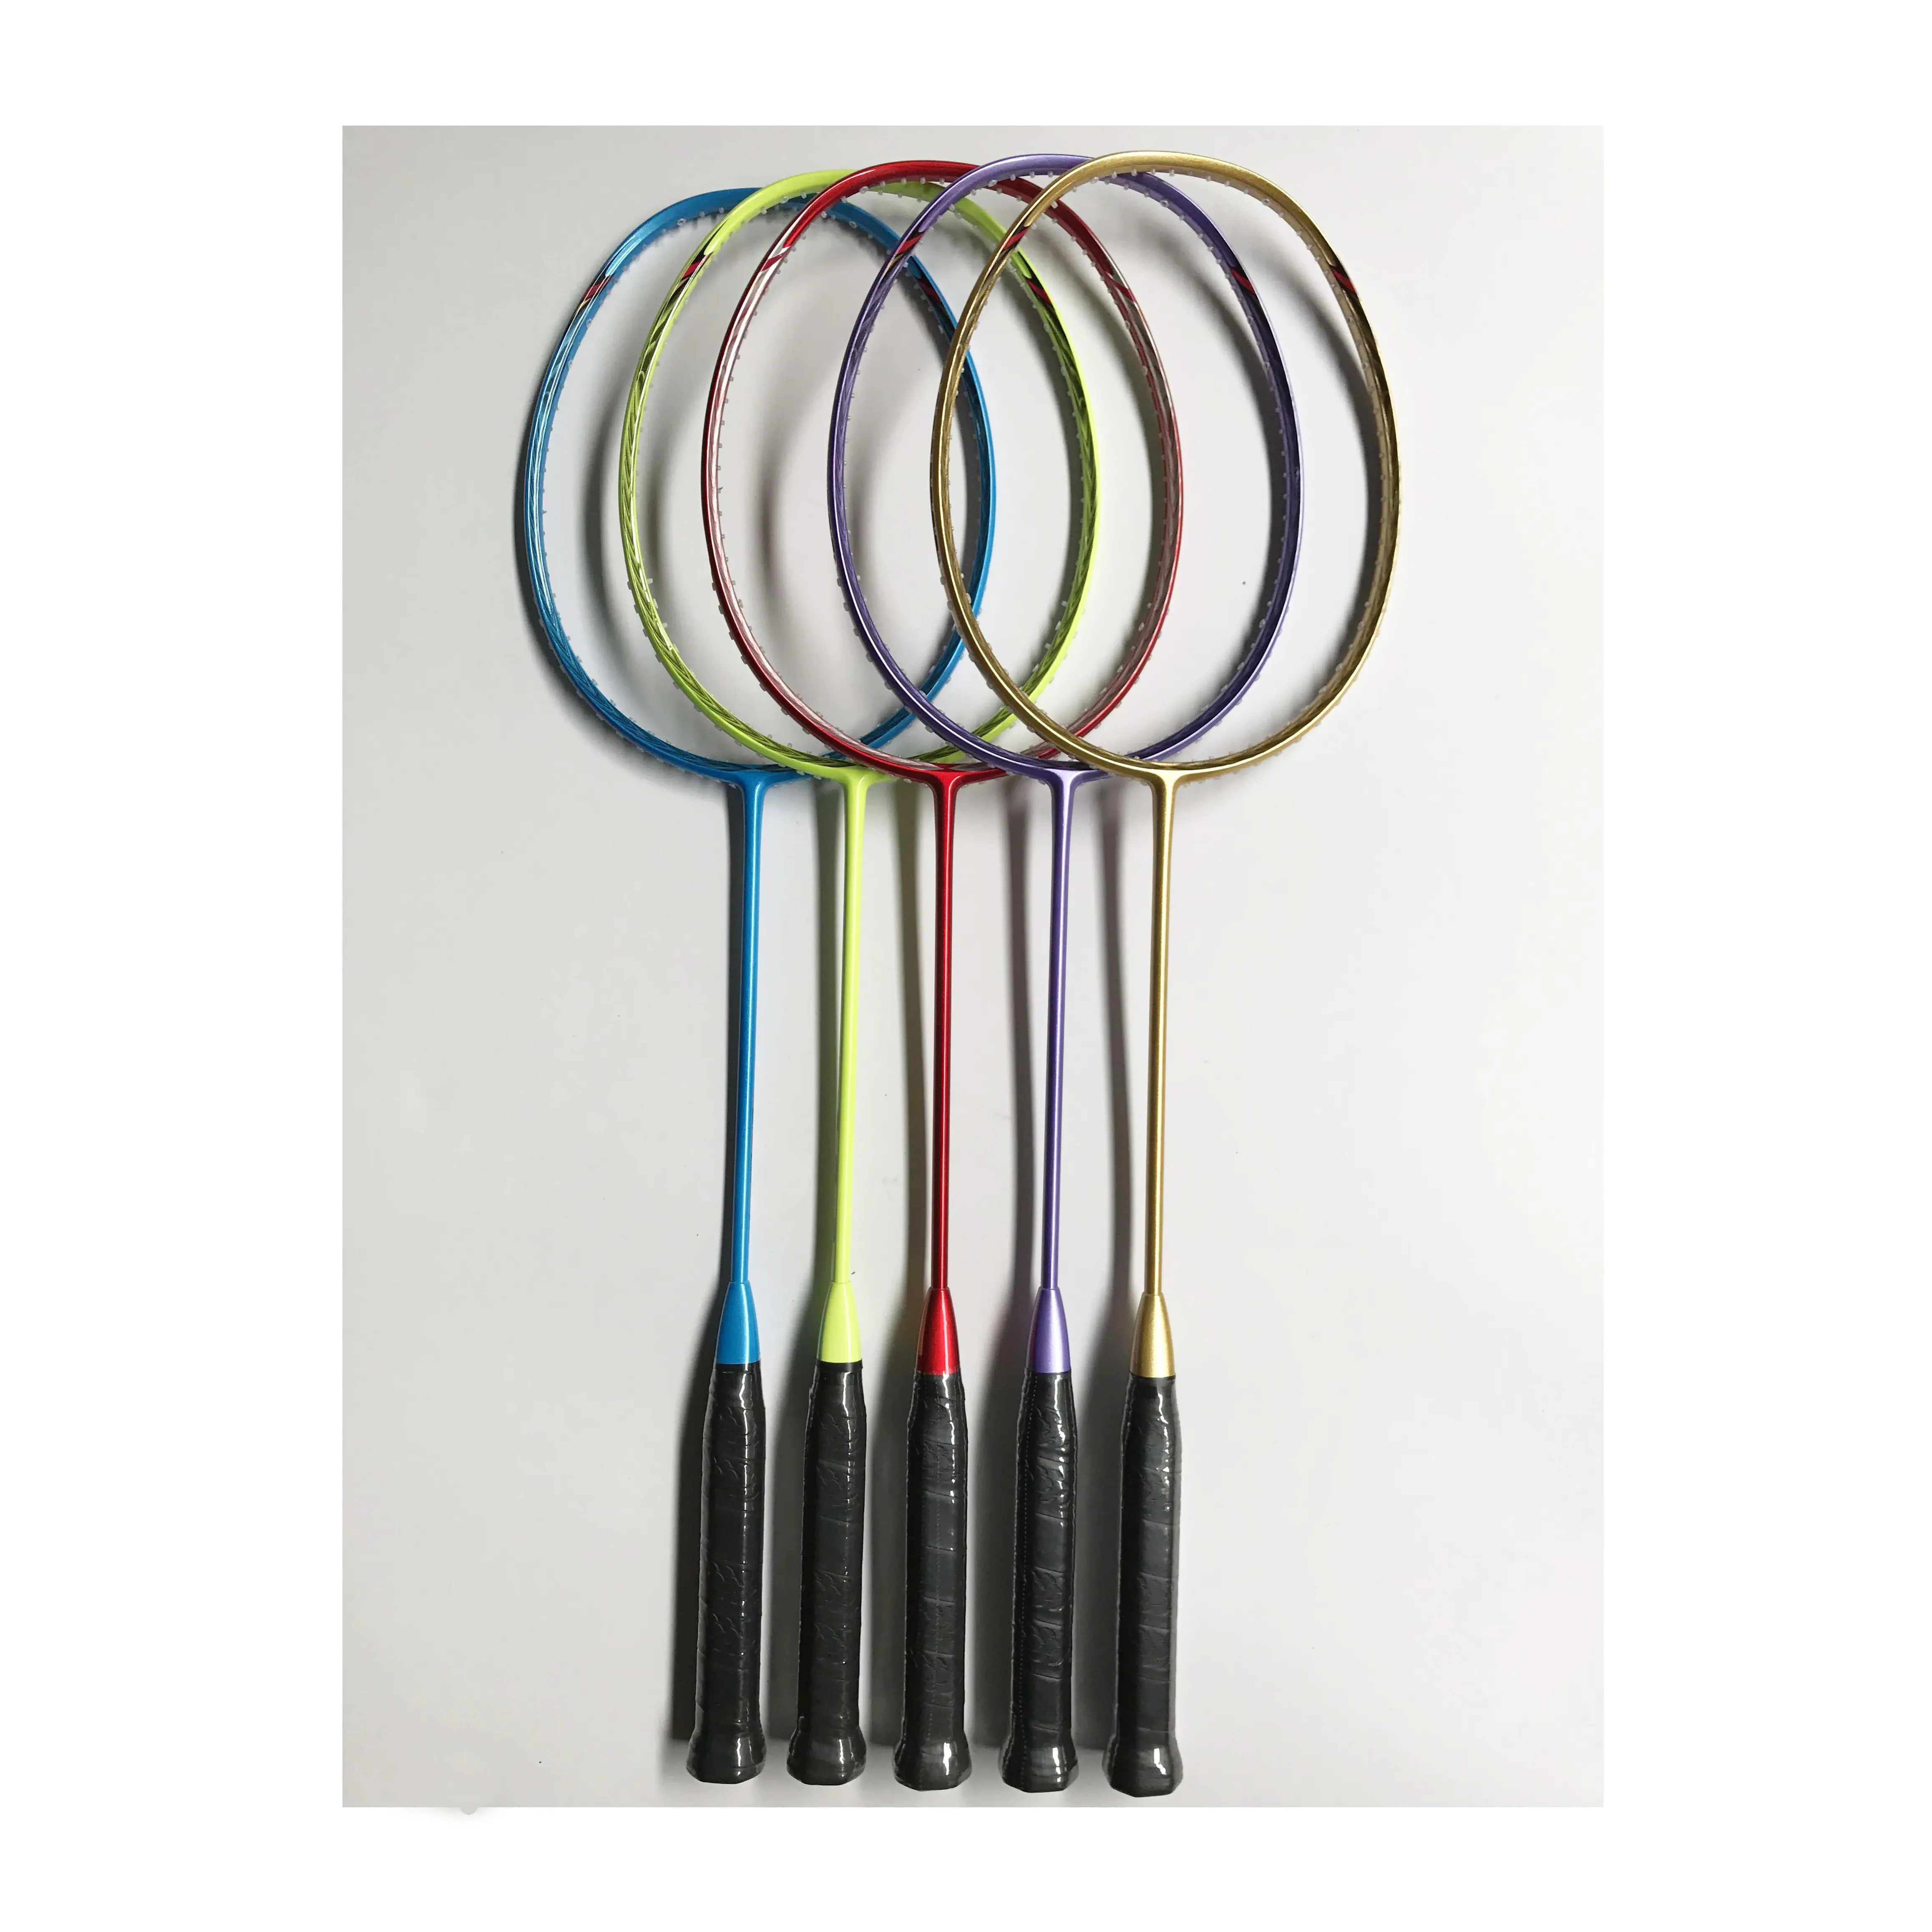 Wholesale high quality colors custom top Carbon aluminum badminton rackets with bag entry training amusement indoor gym